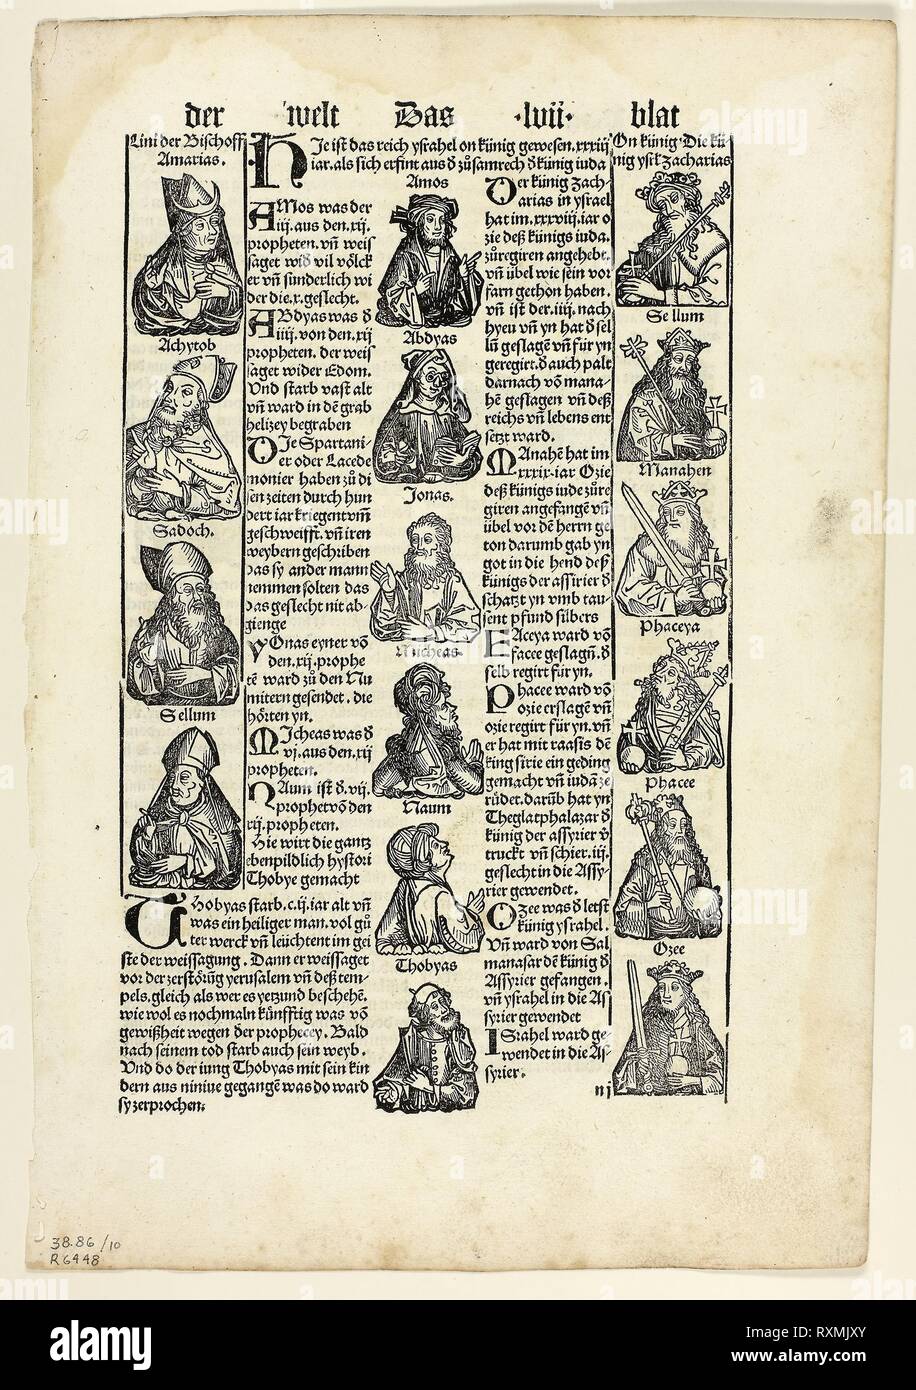 Bishops, Prophets, and Kings from Schedel Weltchronik (Schedel's World History), Plate 10 from Woodcuts from Books of the 15th Century. Unknown Artist (Augsburg, 15th century); printed and published by Johann Schönsperger the Elder (German, ca. 1455-1521); original text by Hartmann Schedel (German, 1440-1514); portfolio text by Wilhelm Ludwig Schreiber (German, 1855-1932). Date: 1496. Dimensions: 300 x 205 mm. Woodcut and letterpress in black (recto and verso) on cream laid paper, tipped onto cream wove paper mat. Origin: Germany. Museum: The Chicago Art Institute. Stock Photo